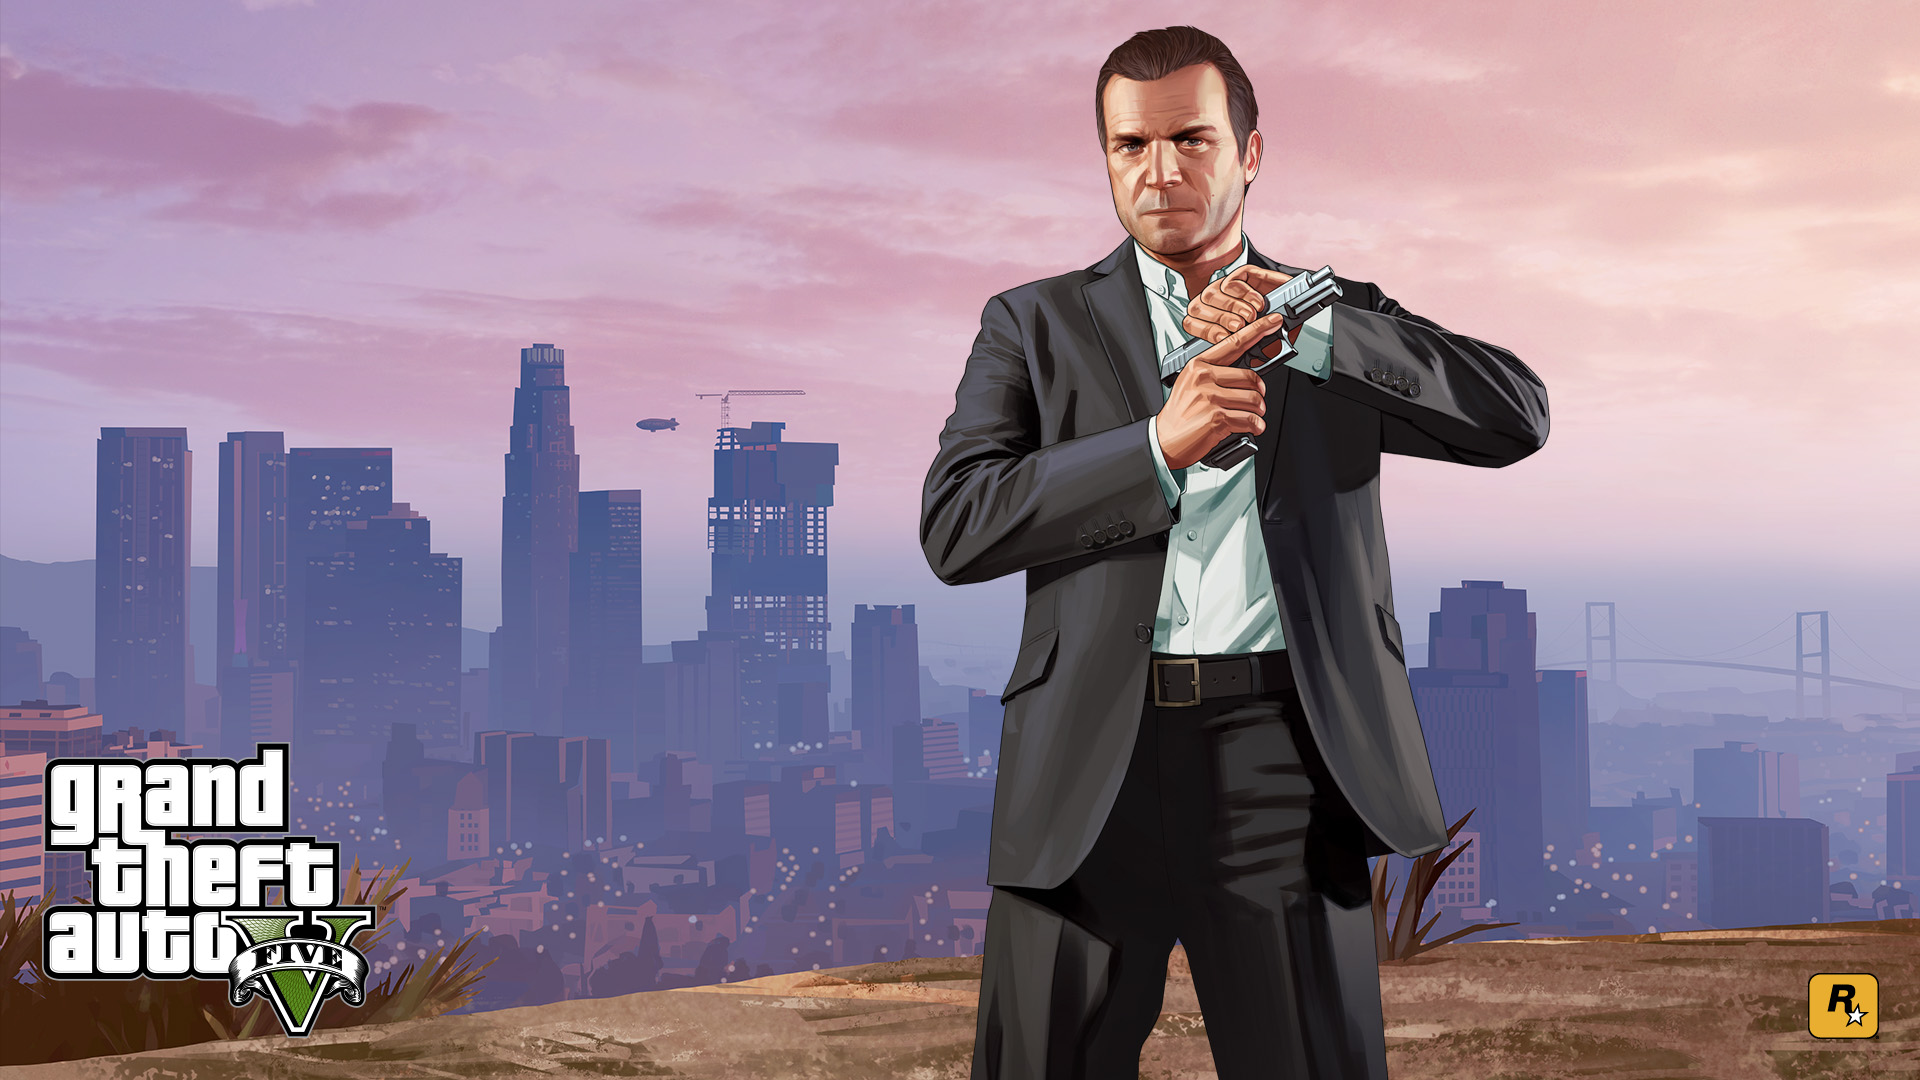 How to run GTA 5 on PC in offline mode?